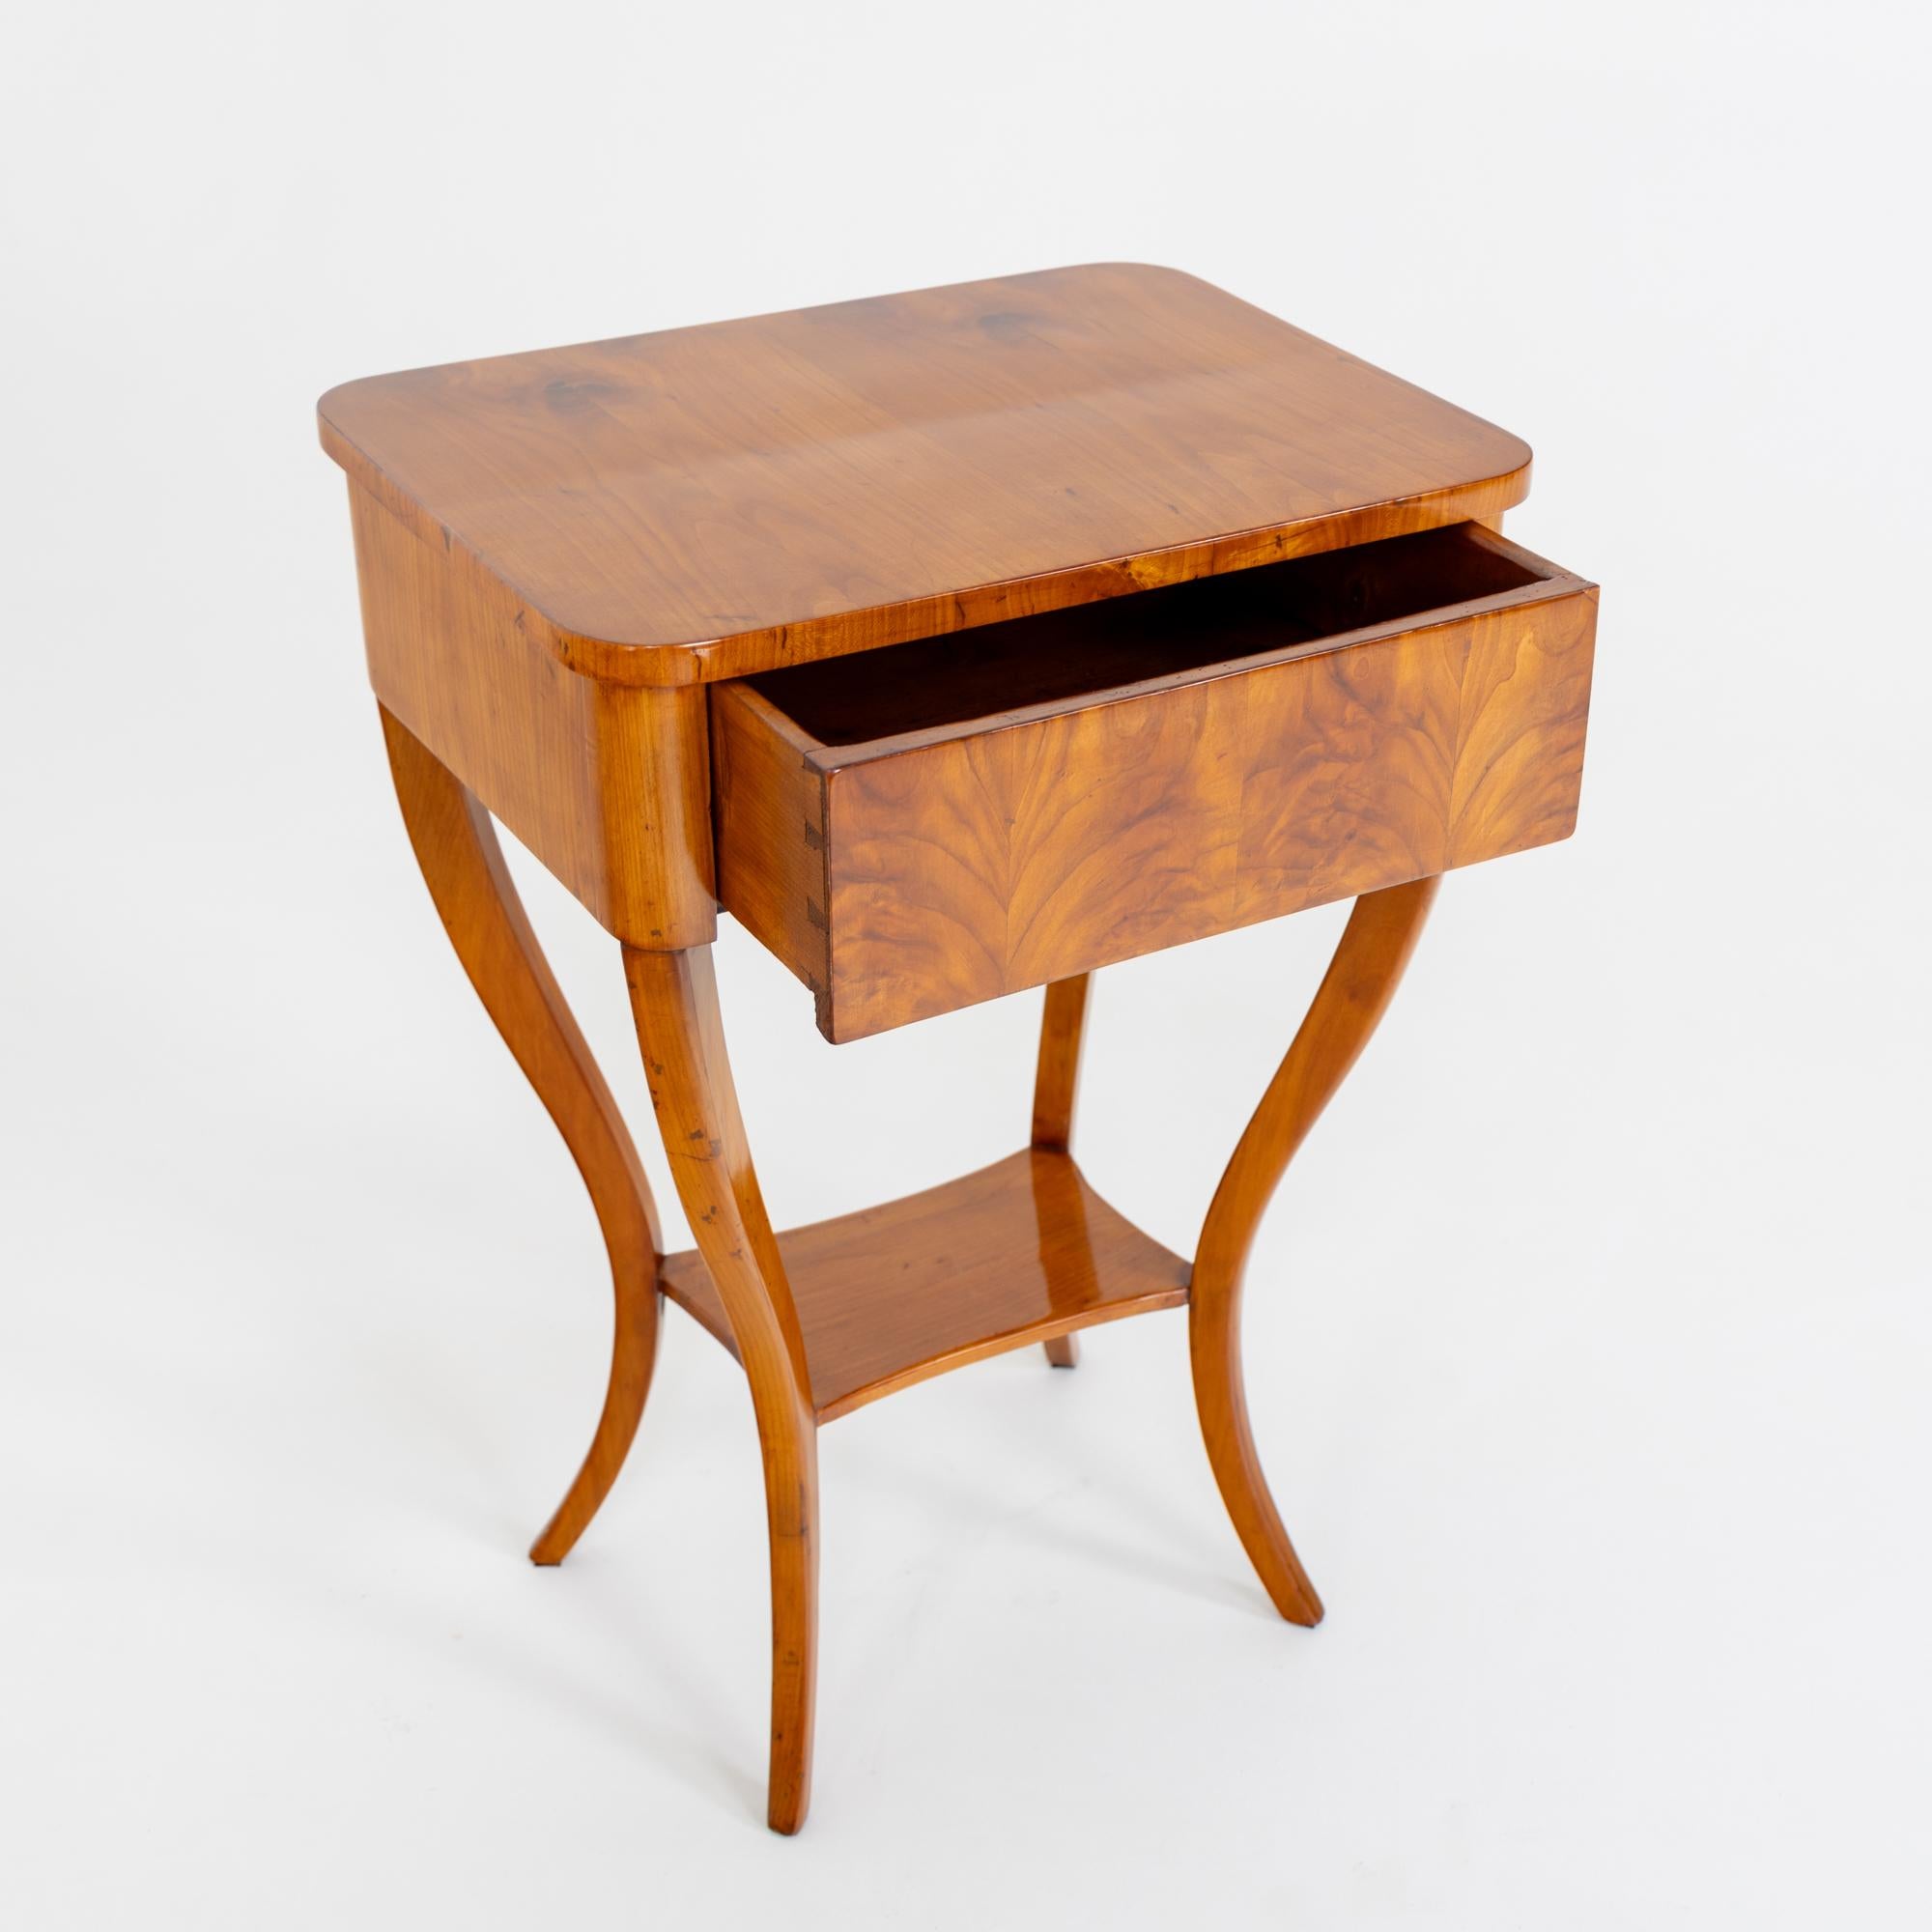 German Biedermeier side table with one drawer, Thuringia circa 1830